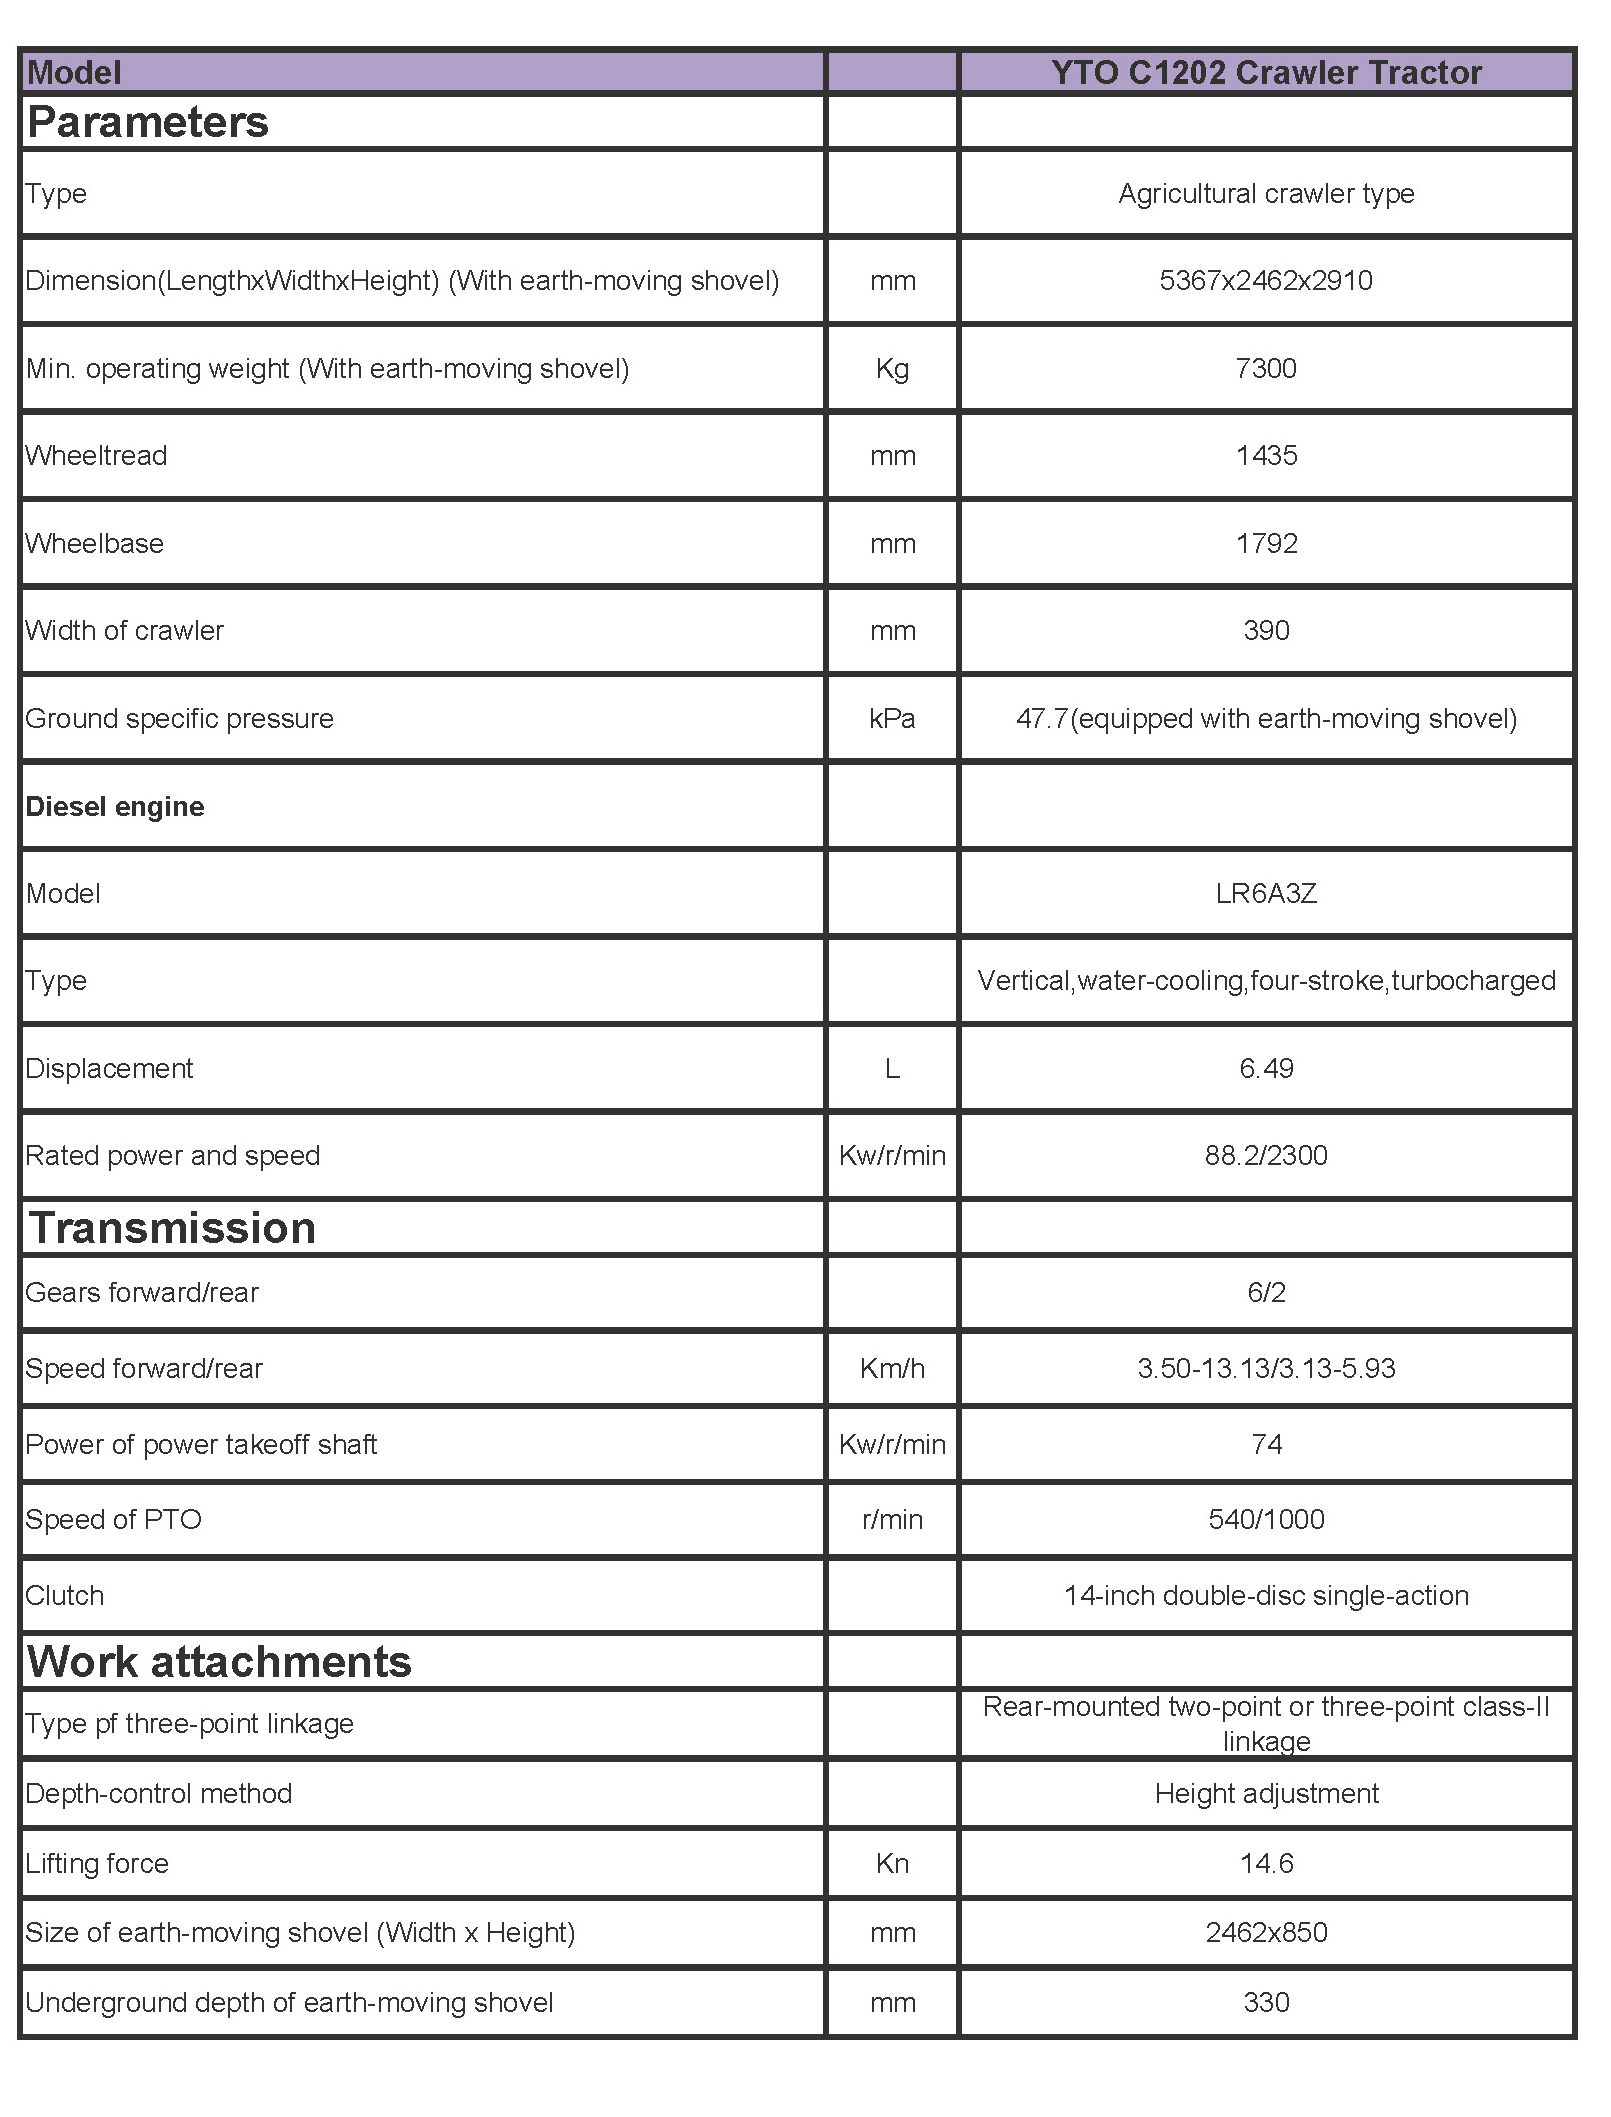 YTO C1202 Crawler Tractor Technical Specification